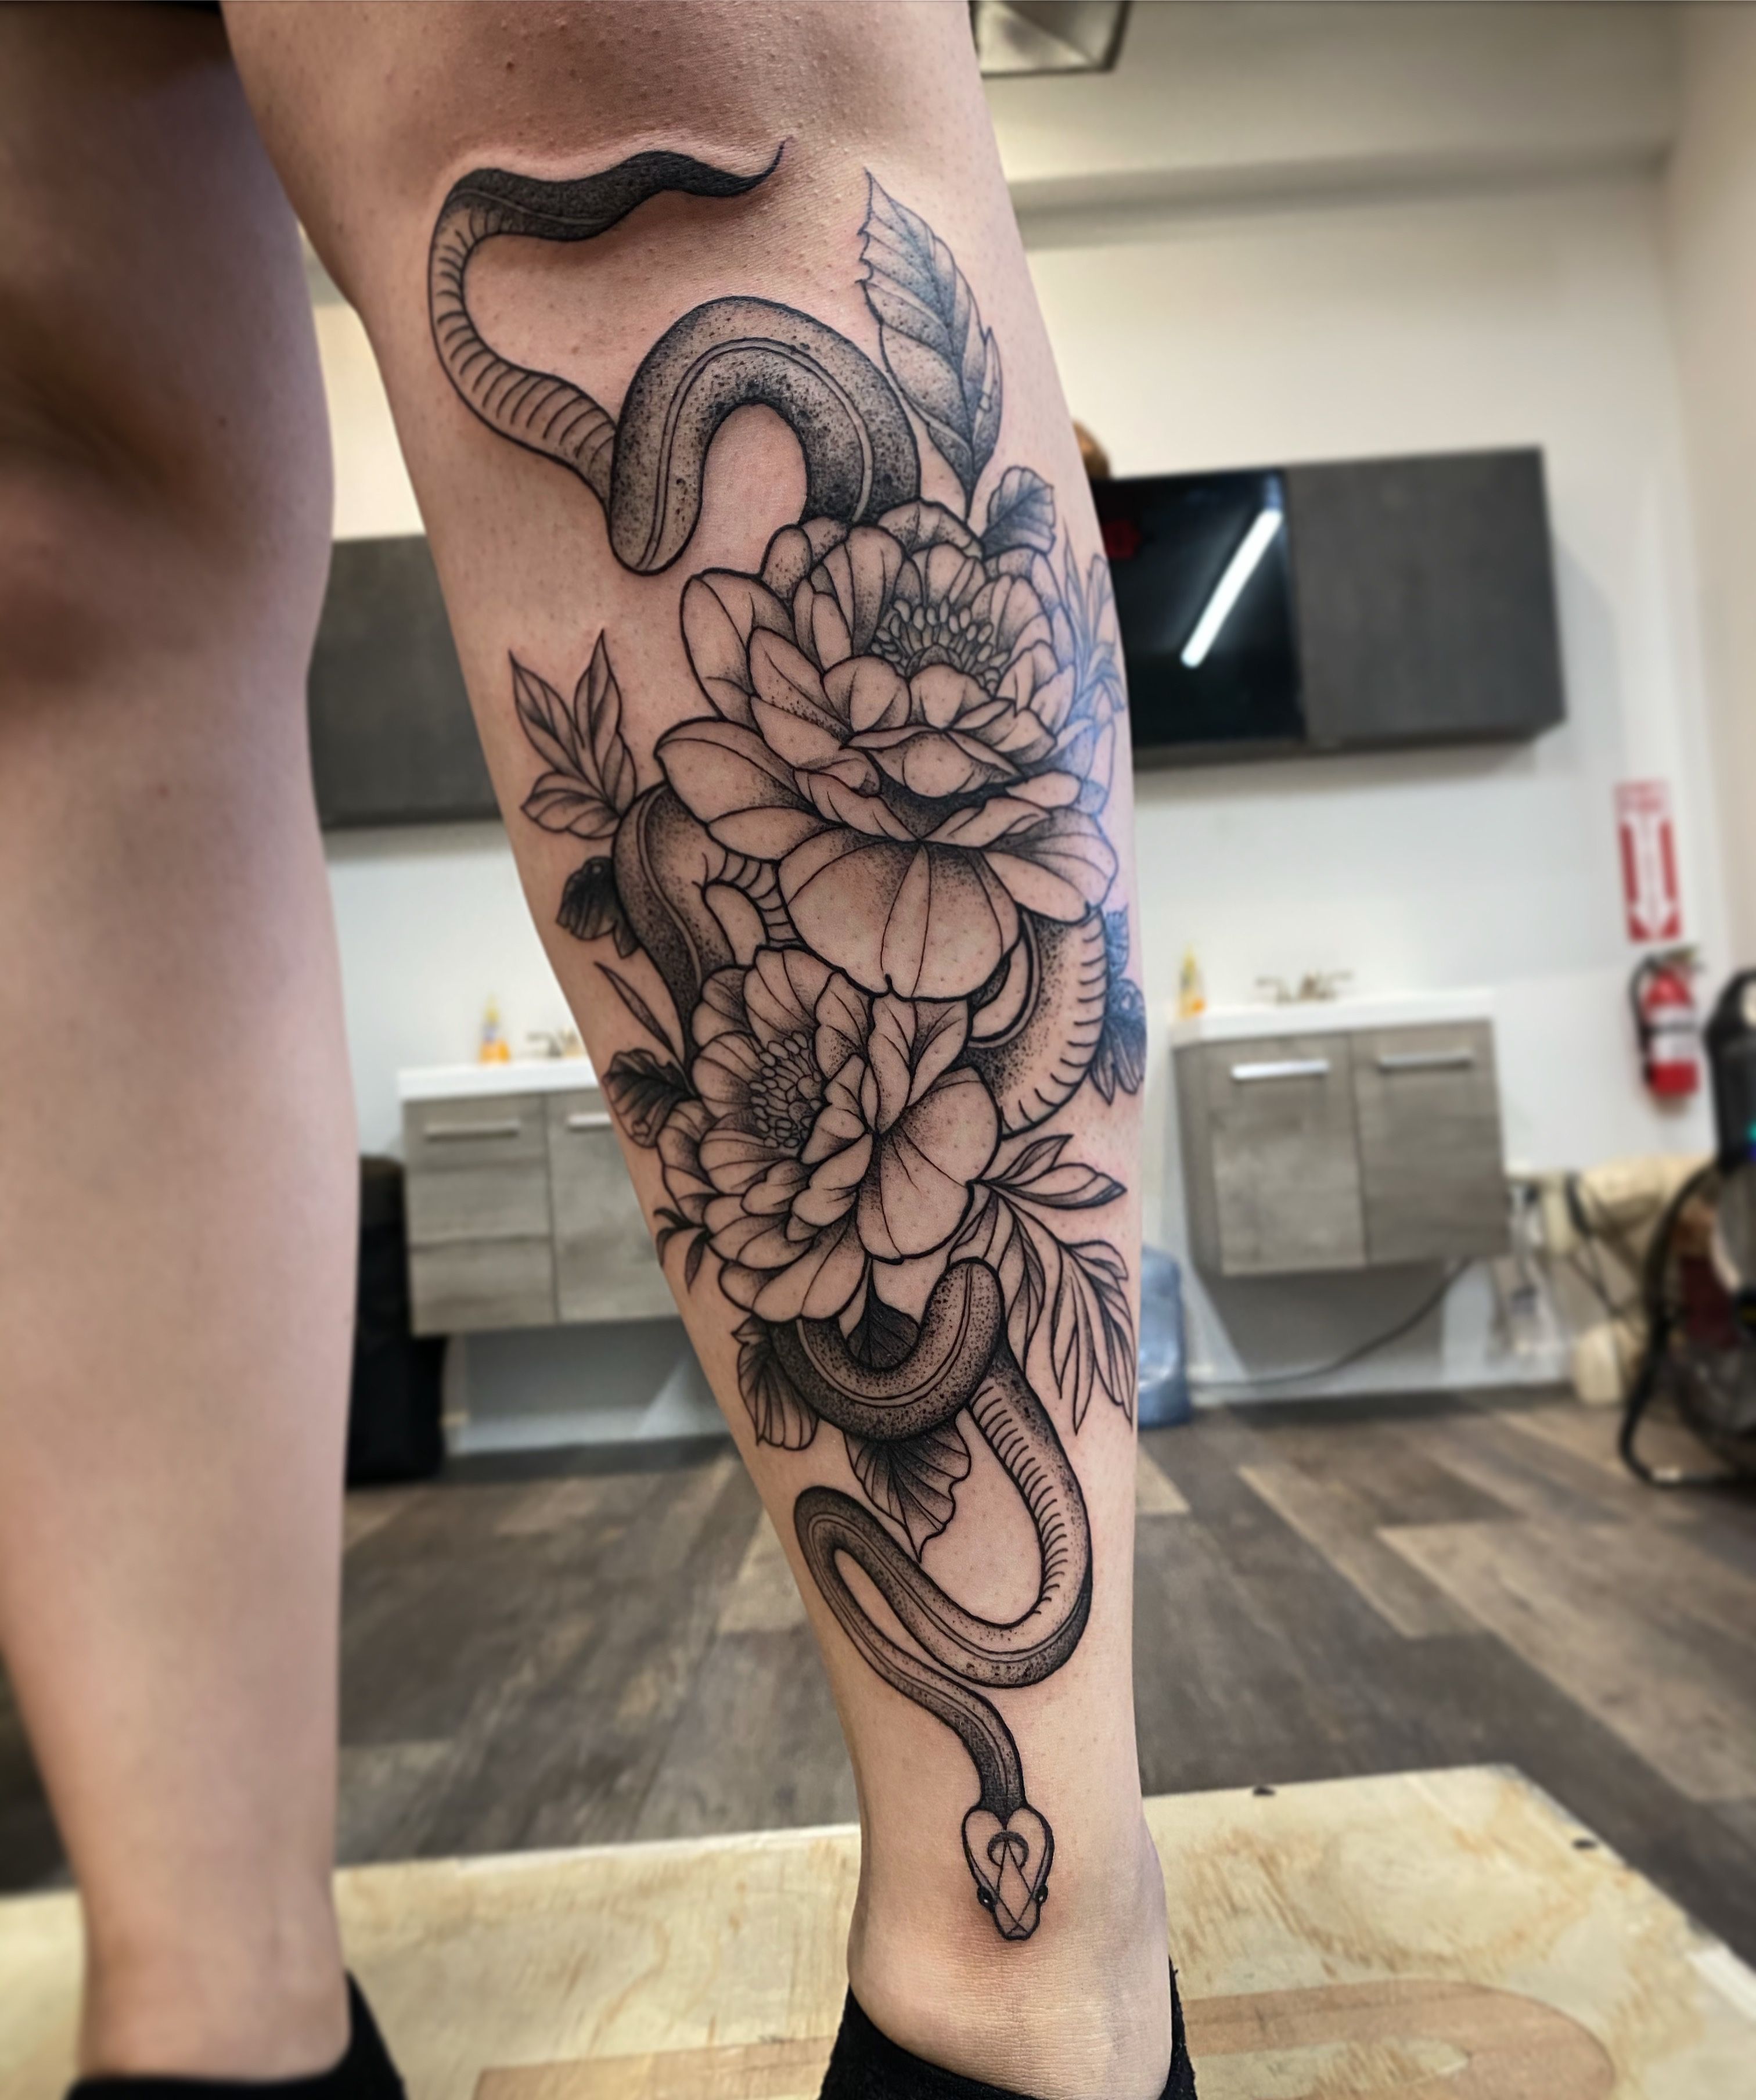 11 Snake Flower Tattoo Ideas That Will Blow Your Mind  alexie